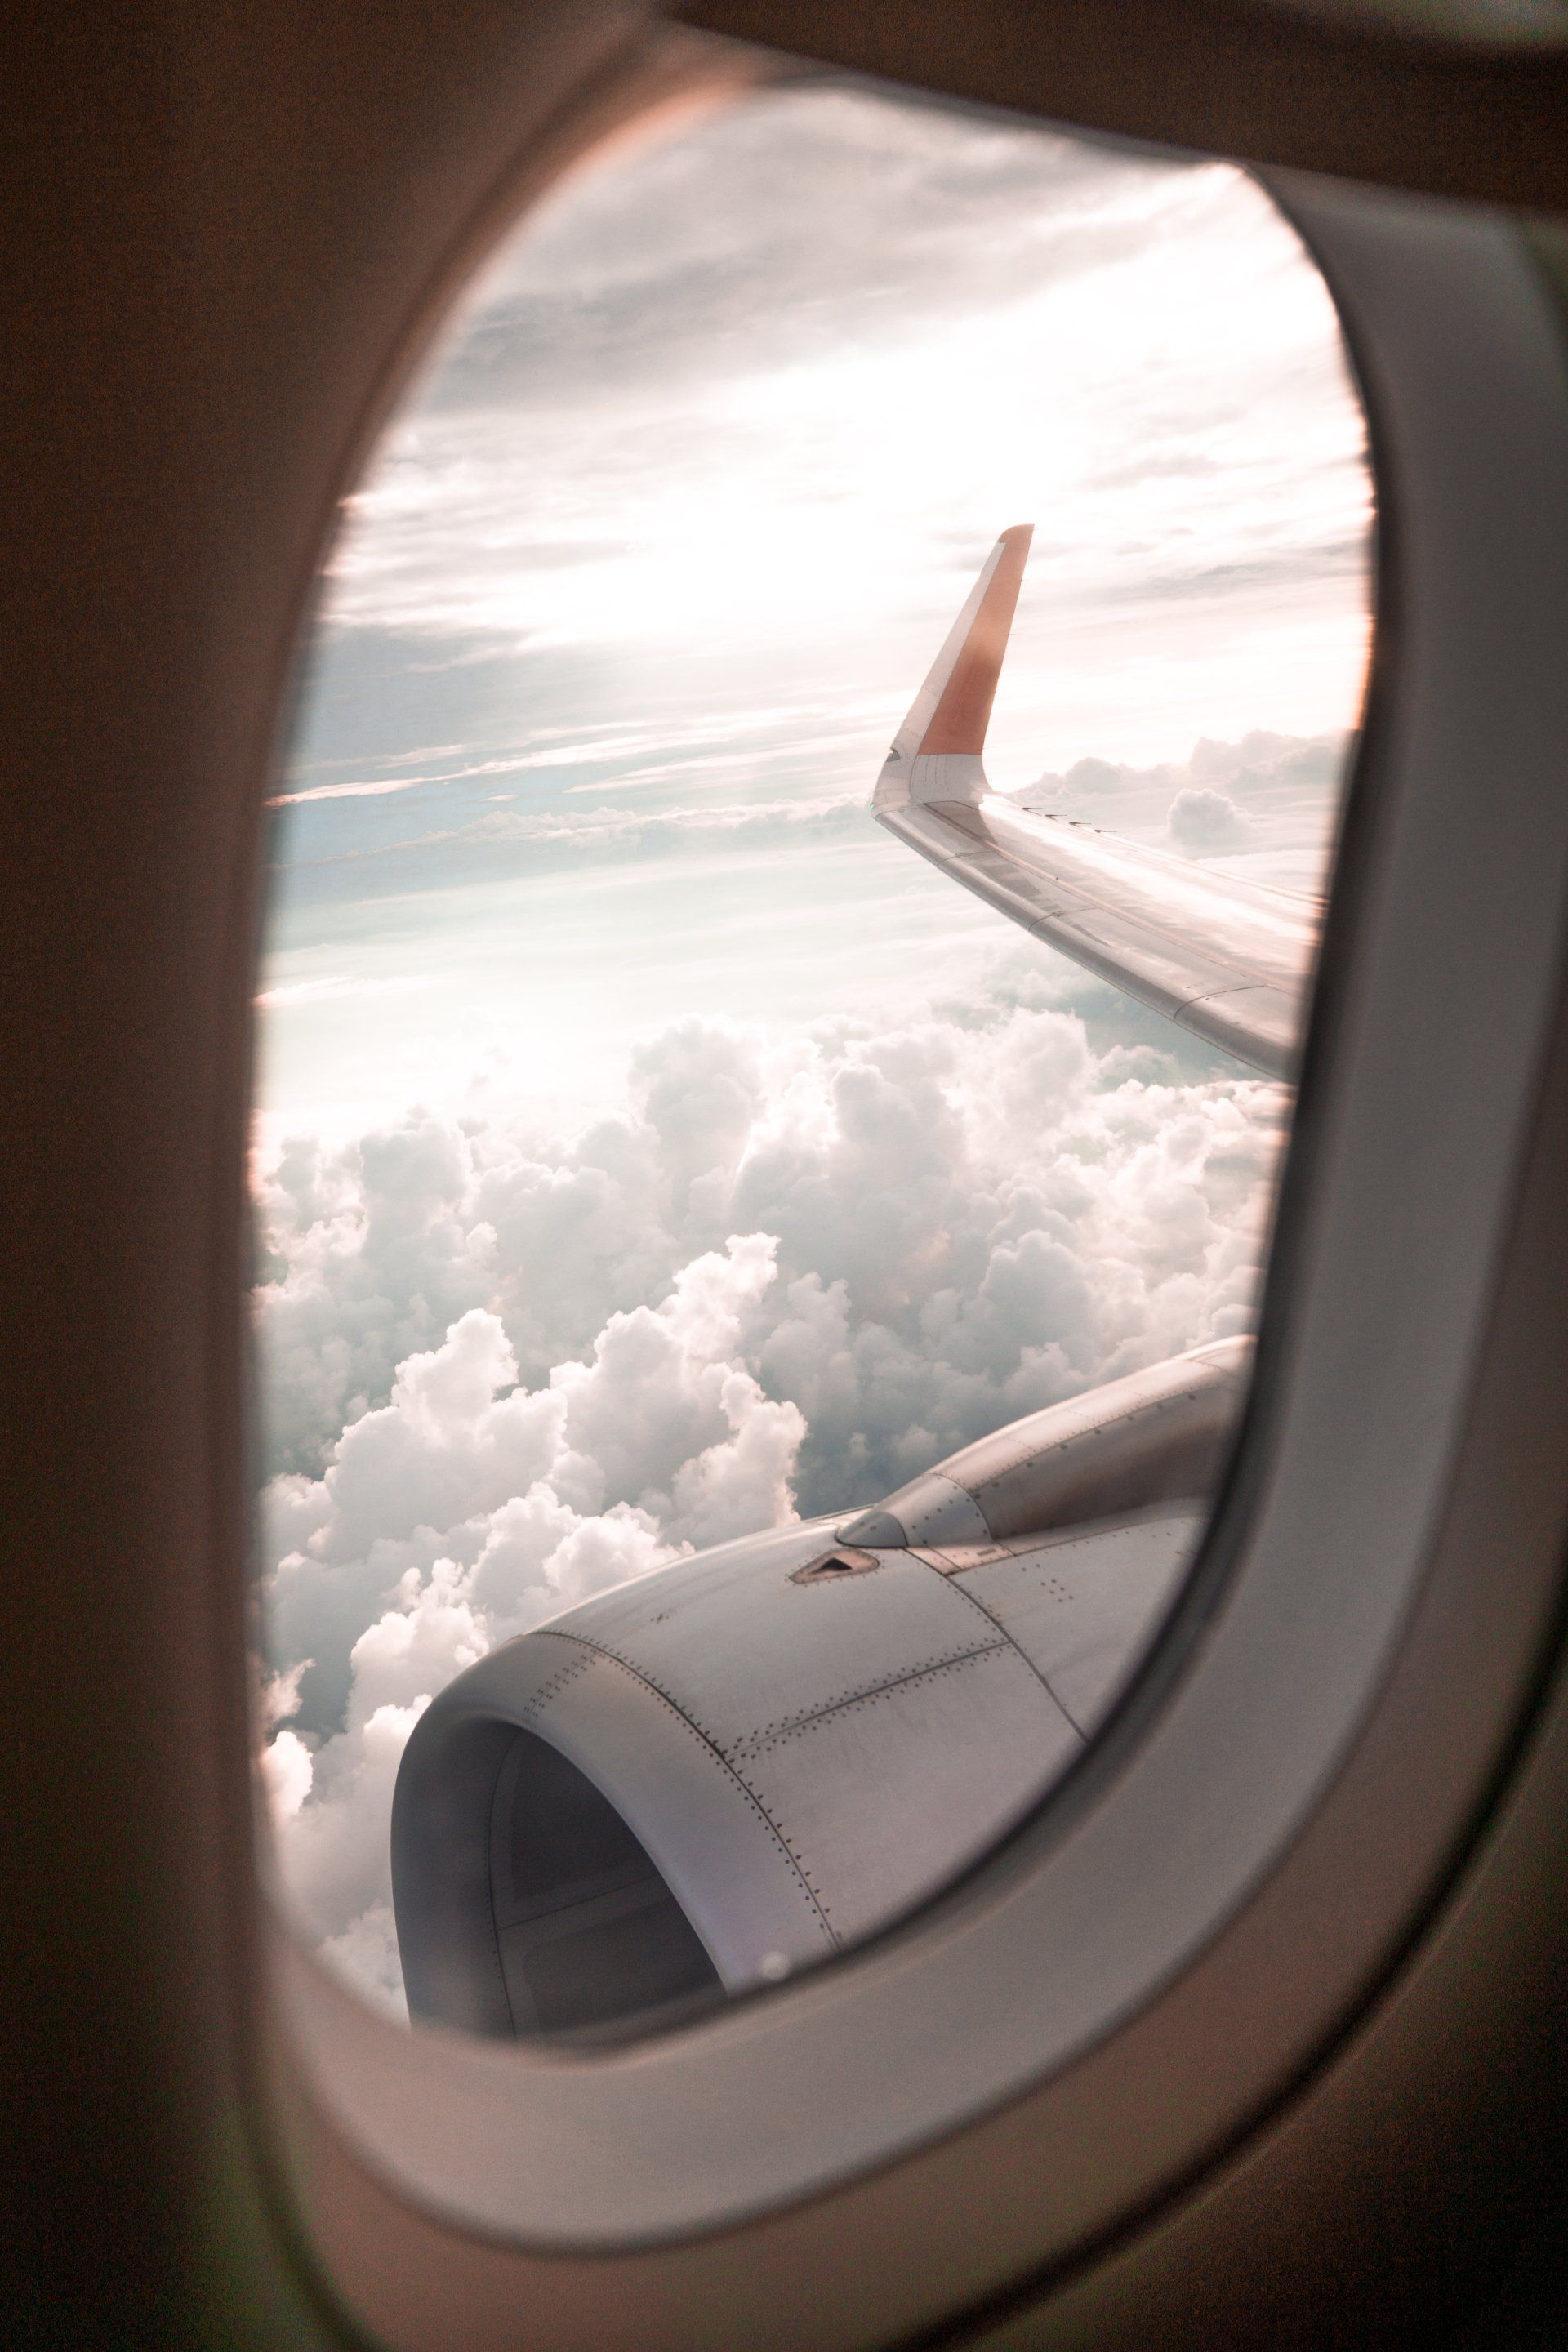 The wing of an airplane is visible through the window.